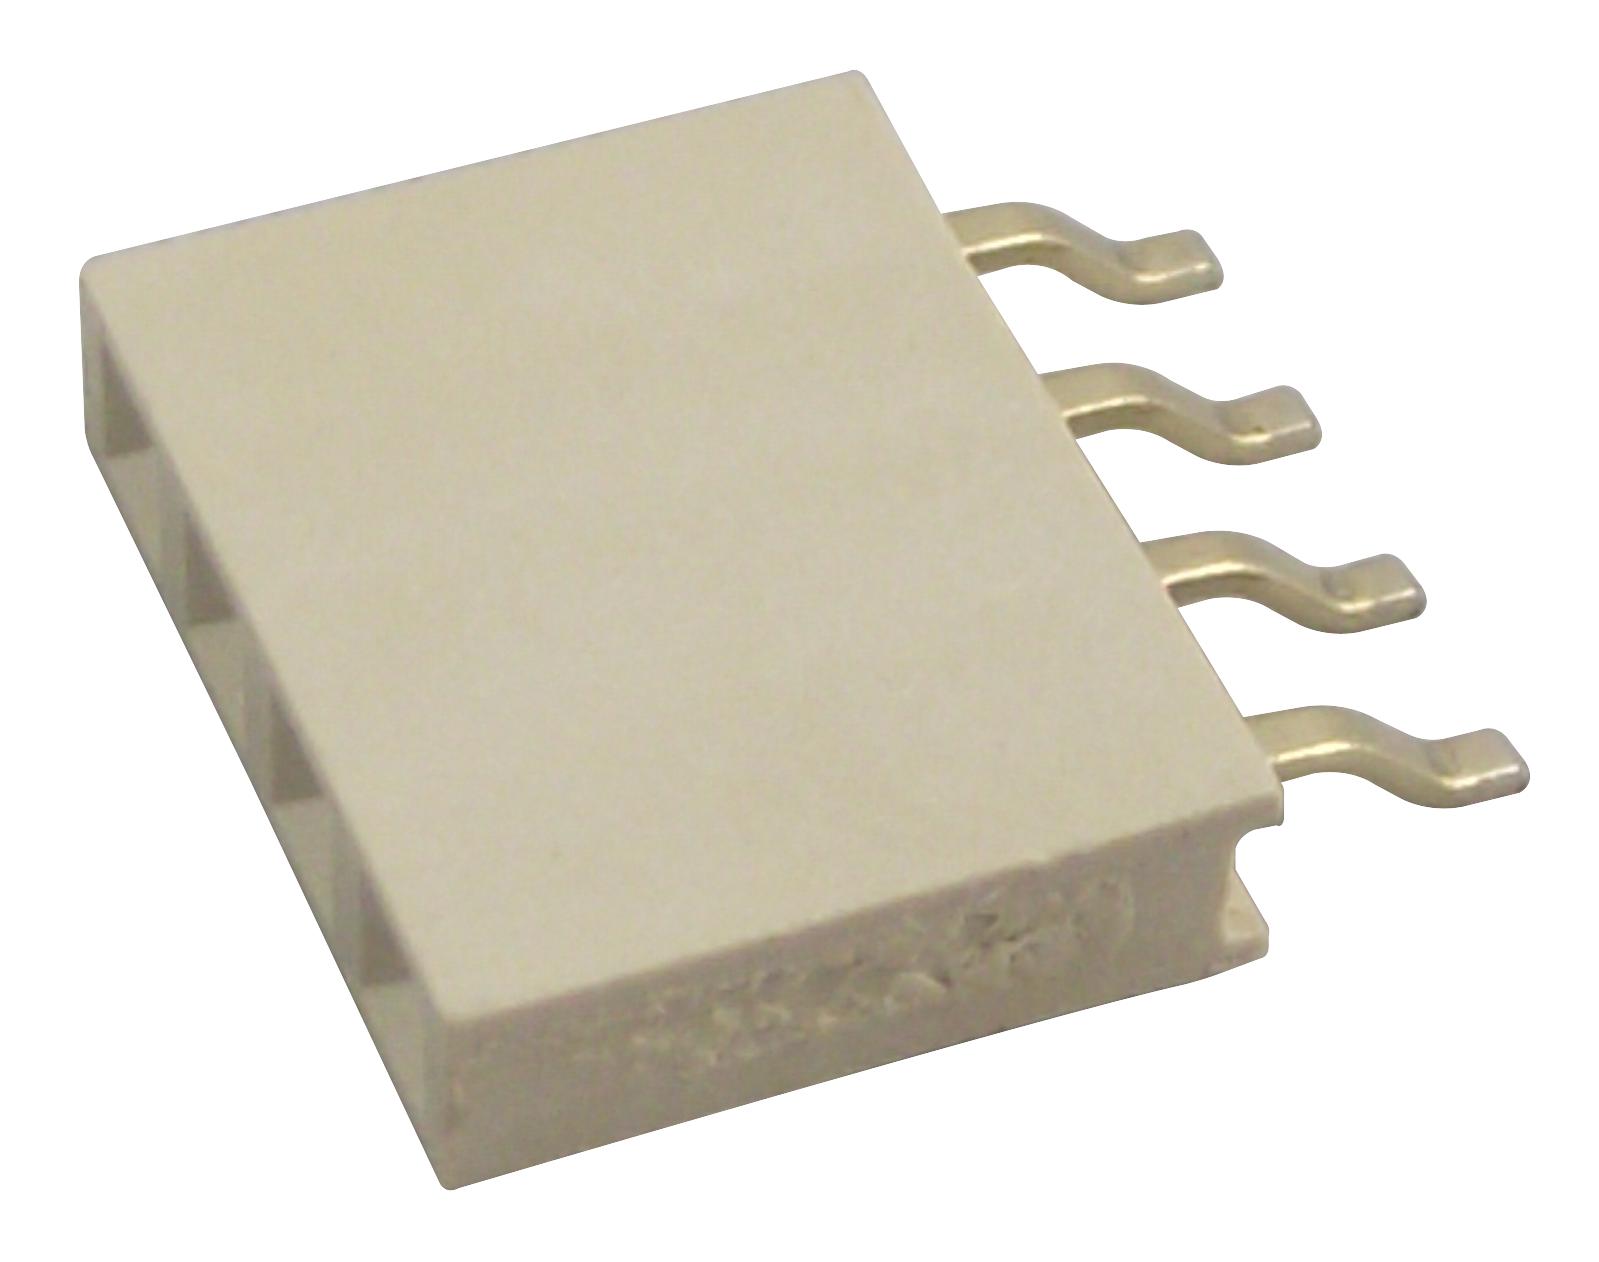 GCT (GLOBAL CONNECTOR TECHNOLOGY) Board-to-Board BG300-04-A-L-A RECEPTACLE, 2.54MM, SMT, R/A, 4WAY GCT (GLOBAL CONNECTOR TECHNOLOGY) 2084263 BG300-04-A-L-A